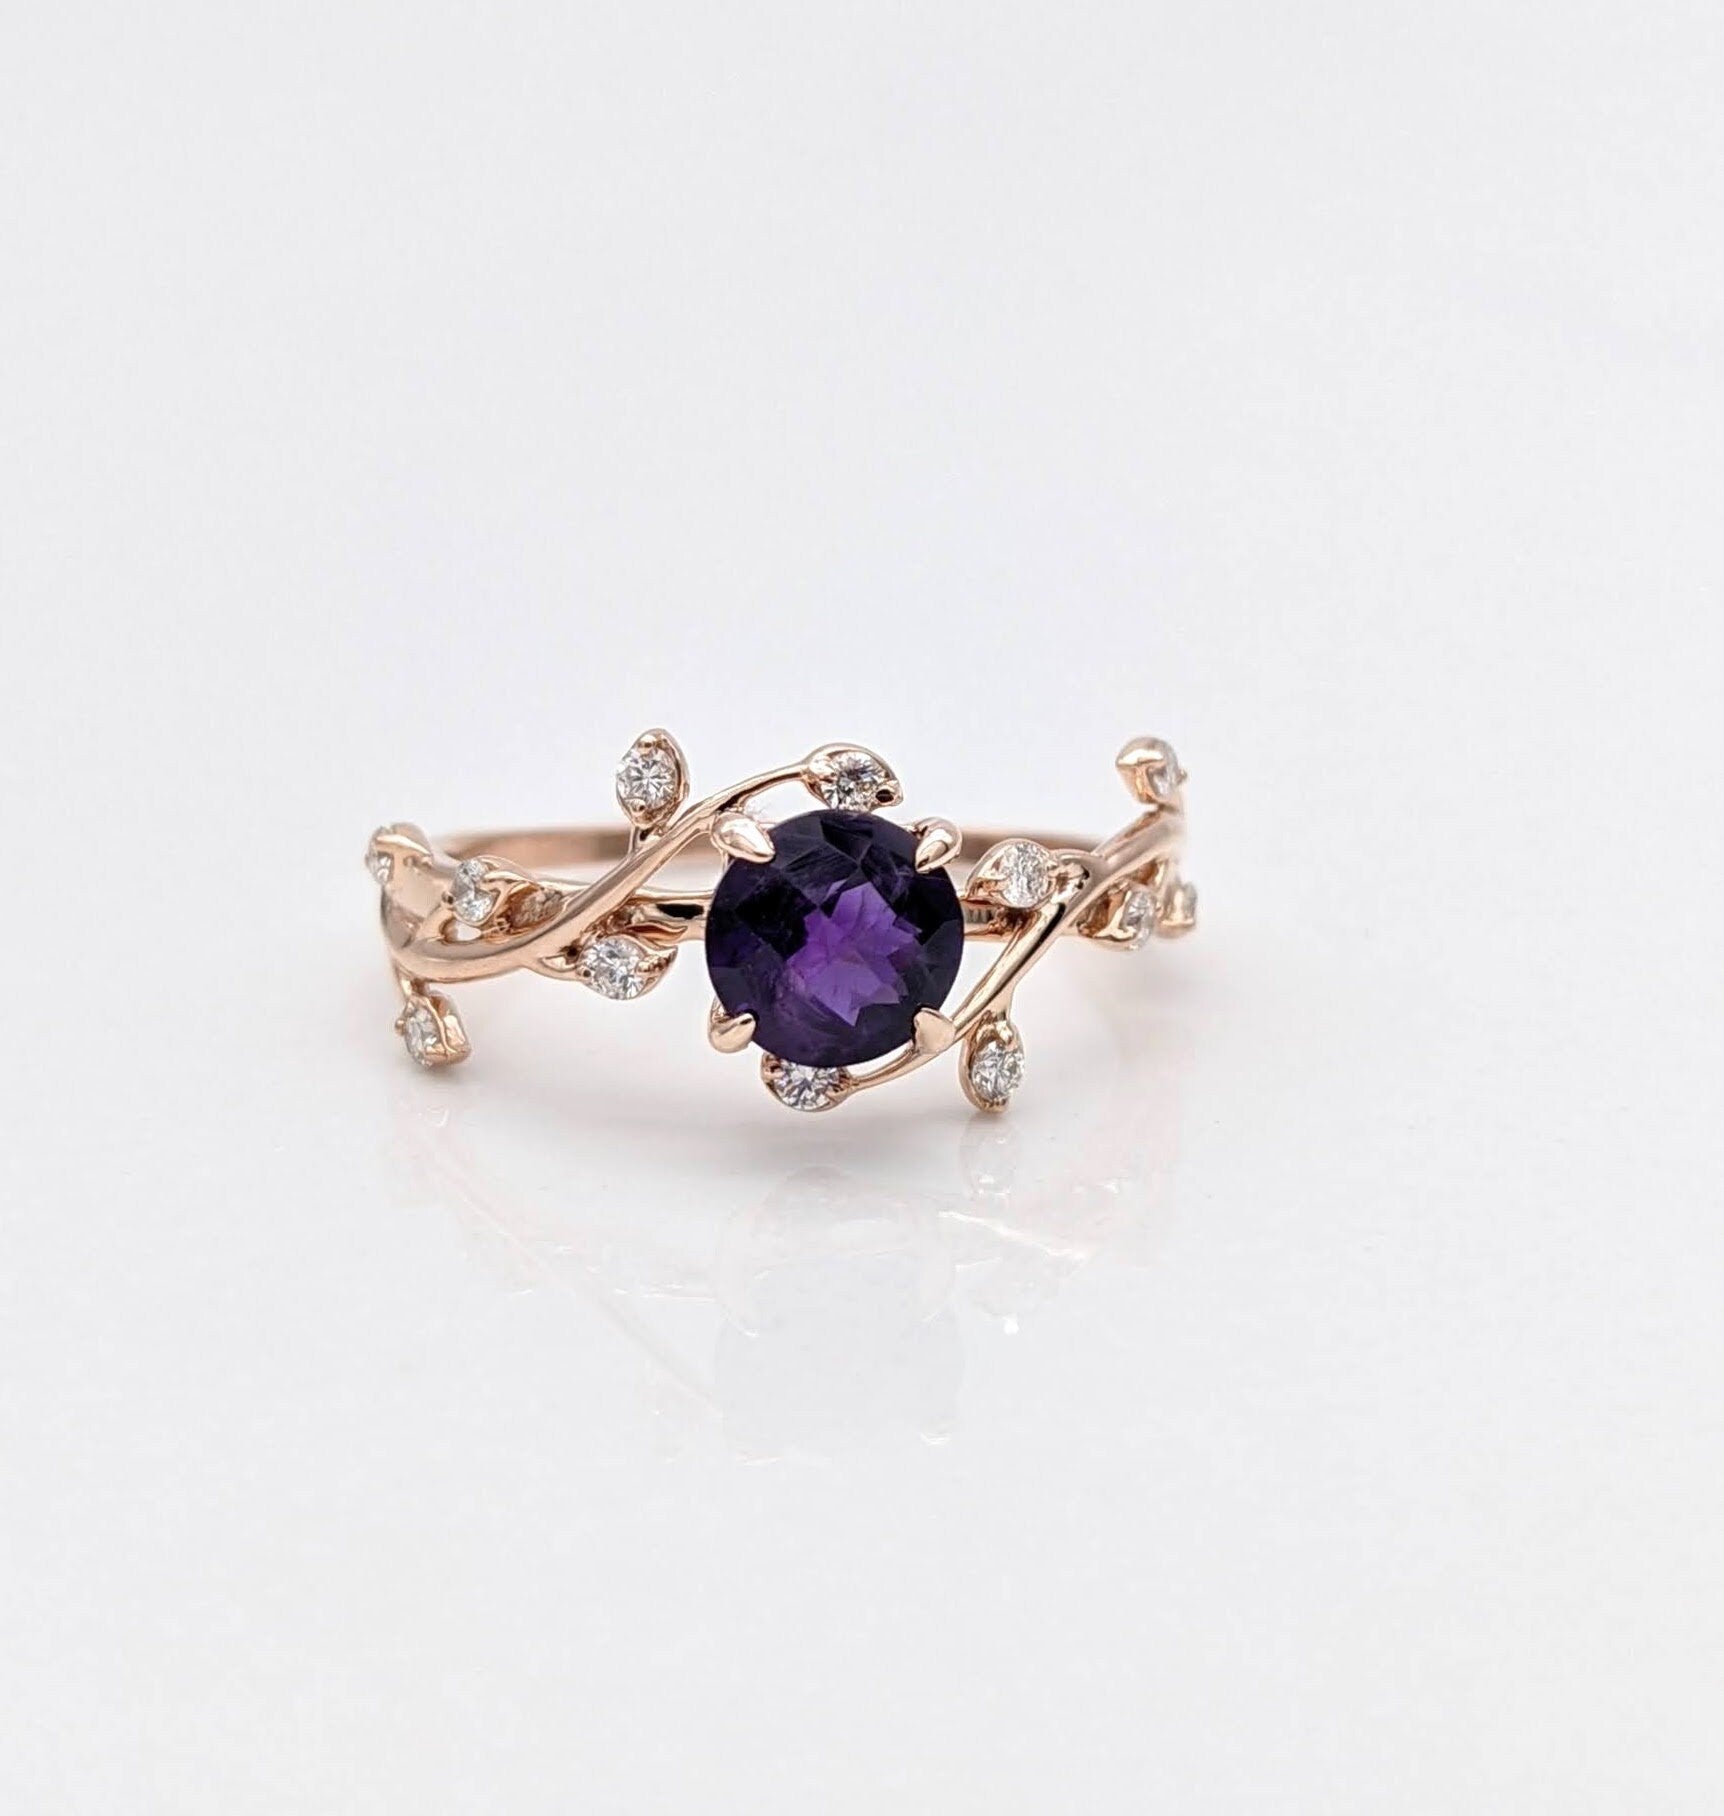 Statement Rings-Amethyst Vine Ring w All Natural Diamond Accents in Solid 14k Gold || Round 5mm || Earth Mined || February Birthstone || Customizable - NNJGemstones